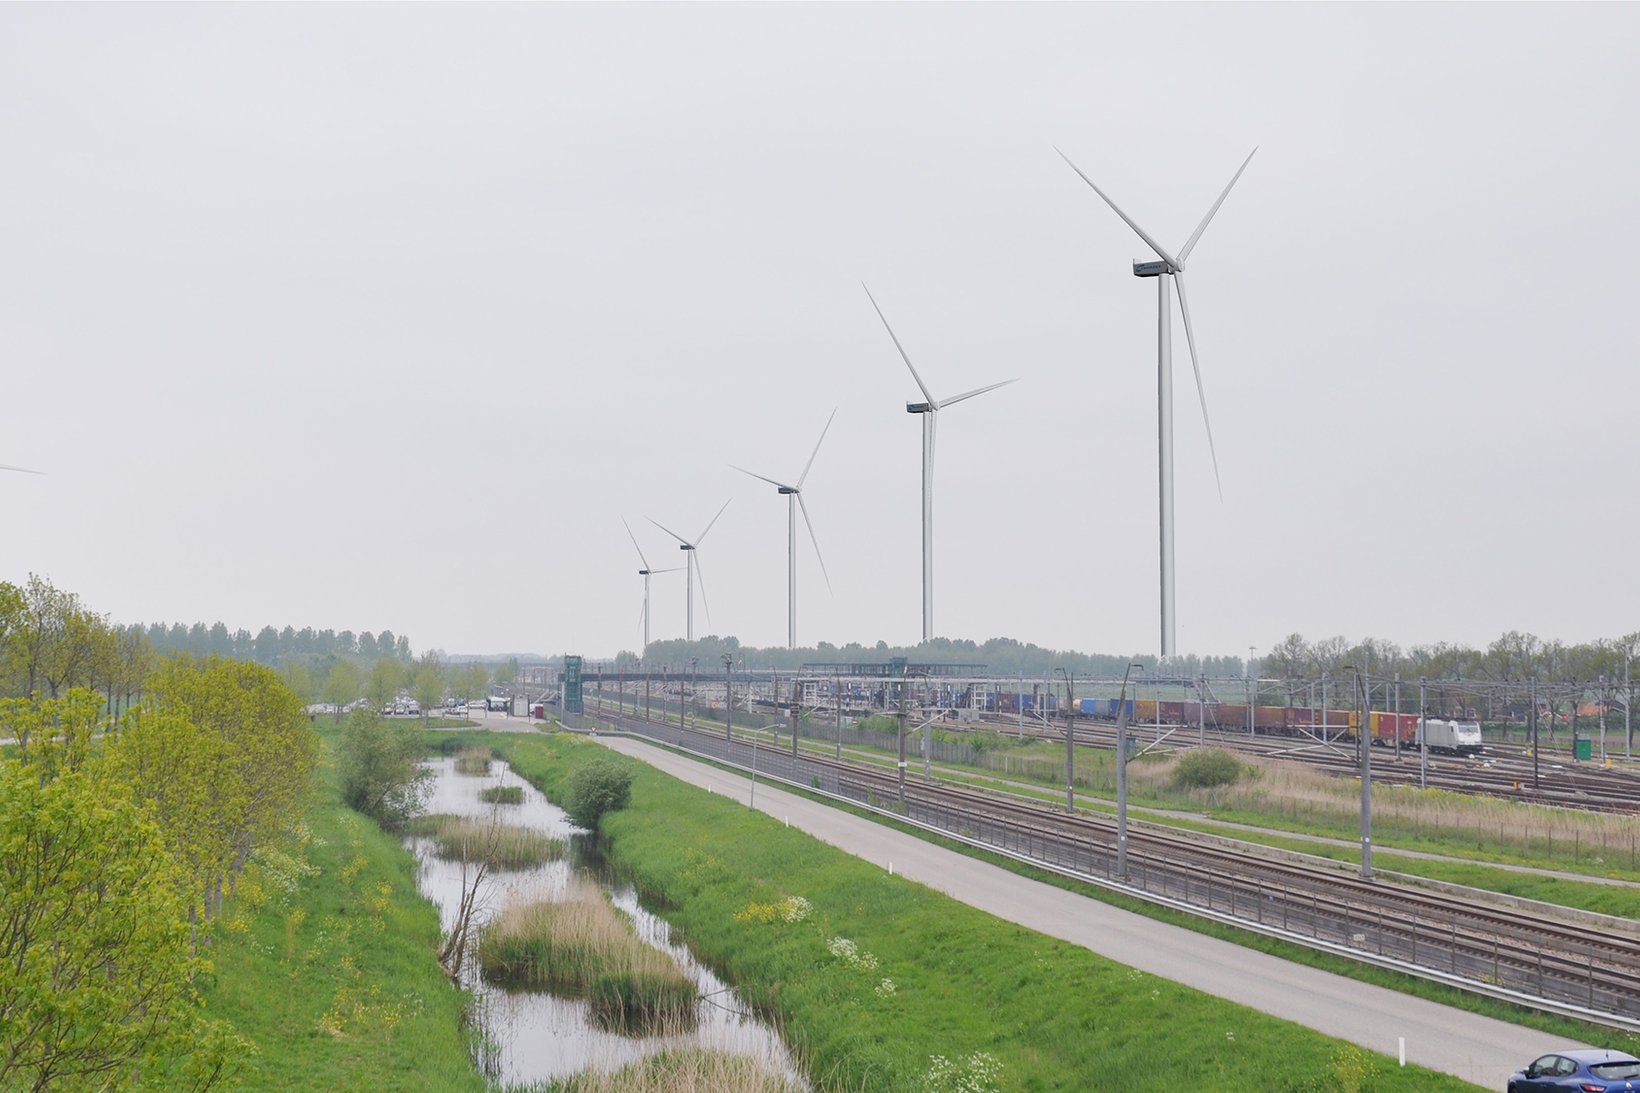 Wind farm Klaverspoor - how it will look when completed